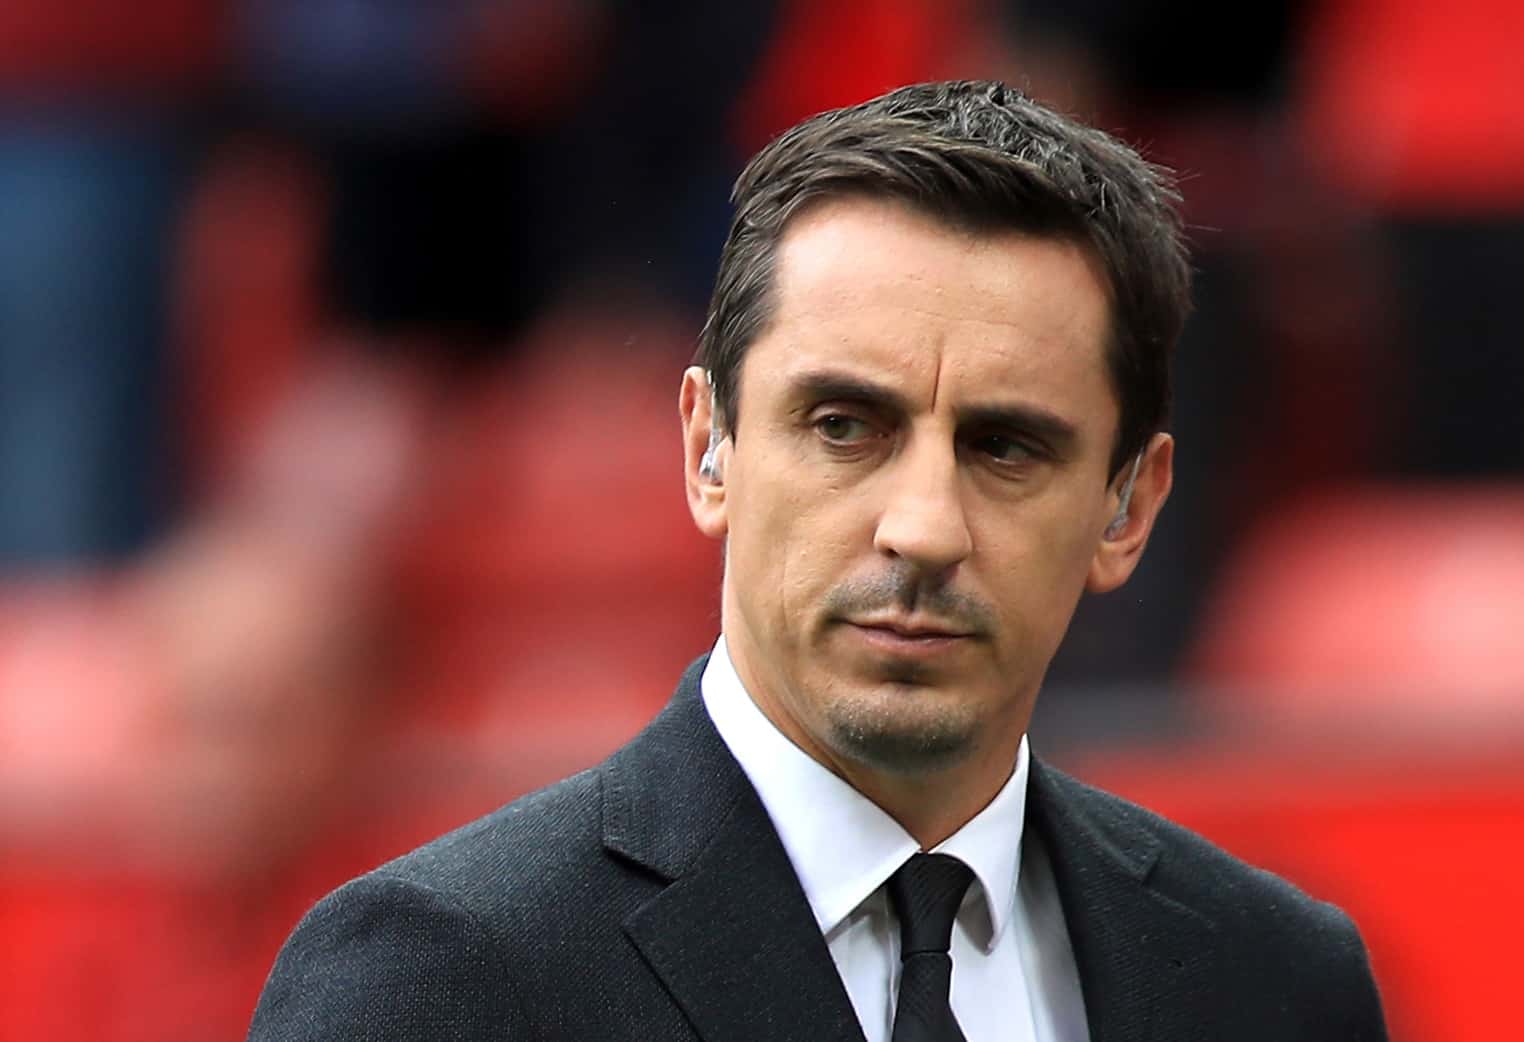 ‘It’s not about the party’: Gary Neville sums up public anger over Xmas bash perfectly